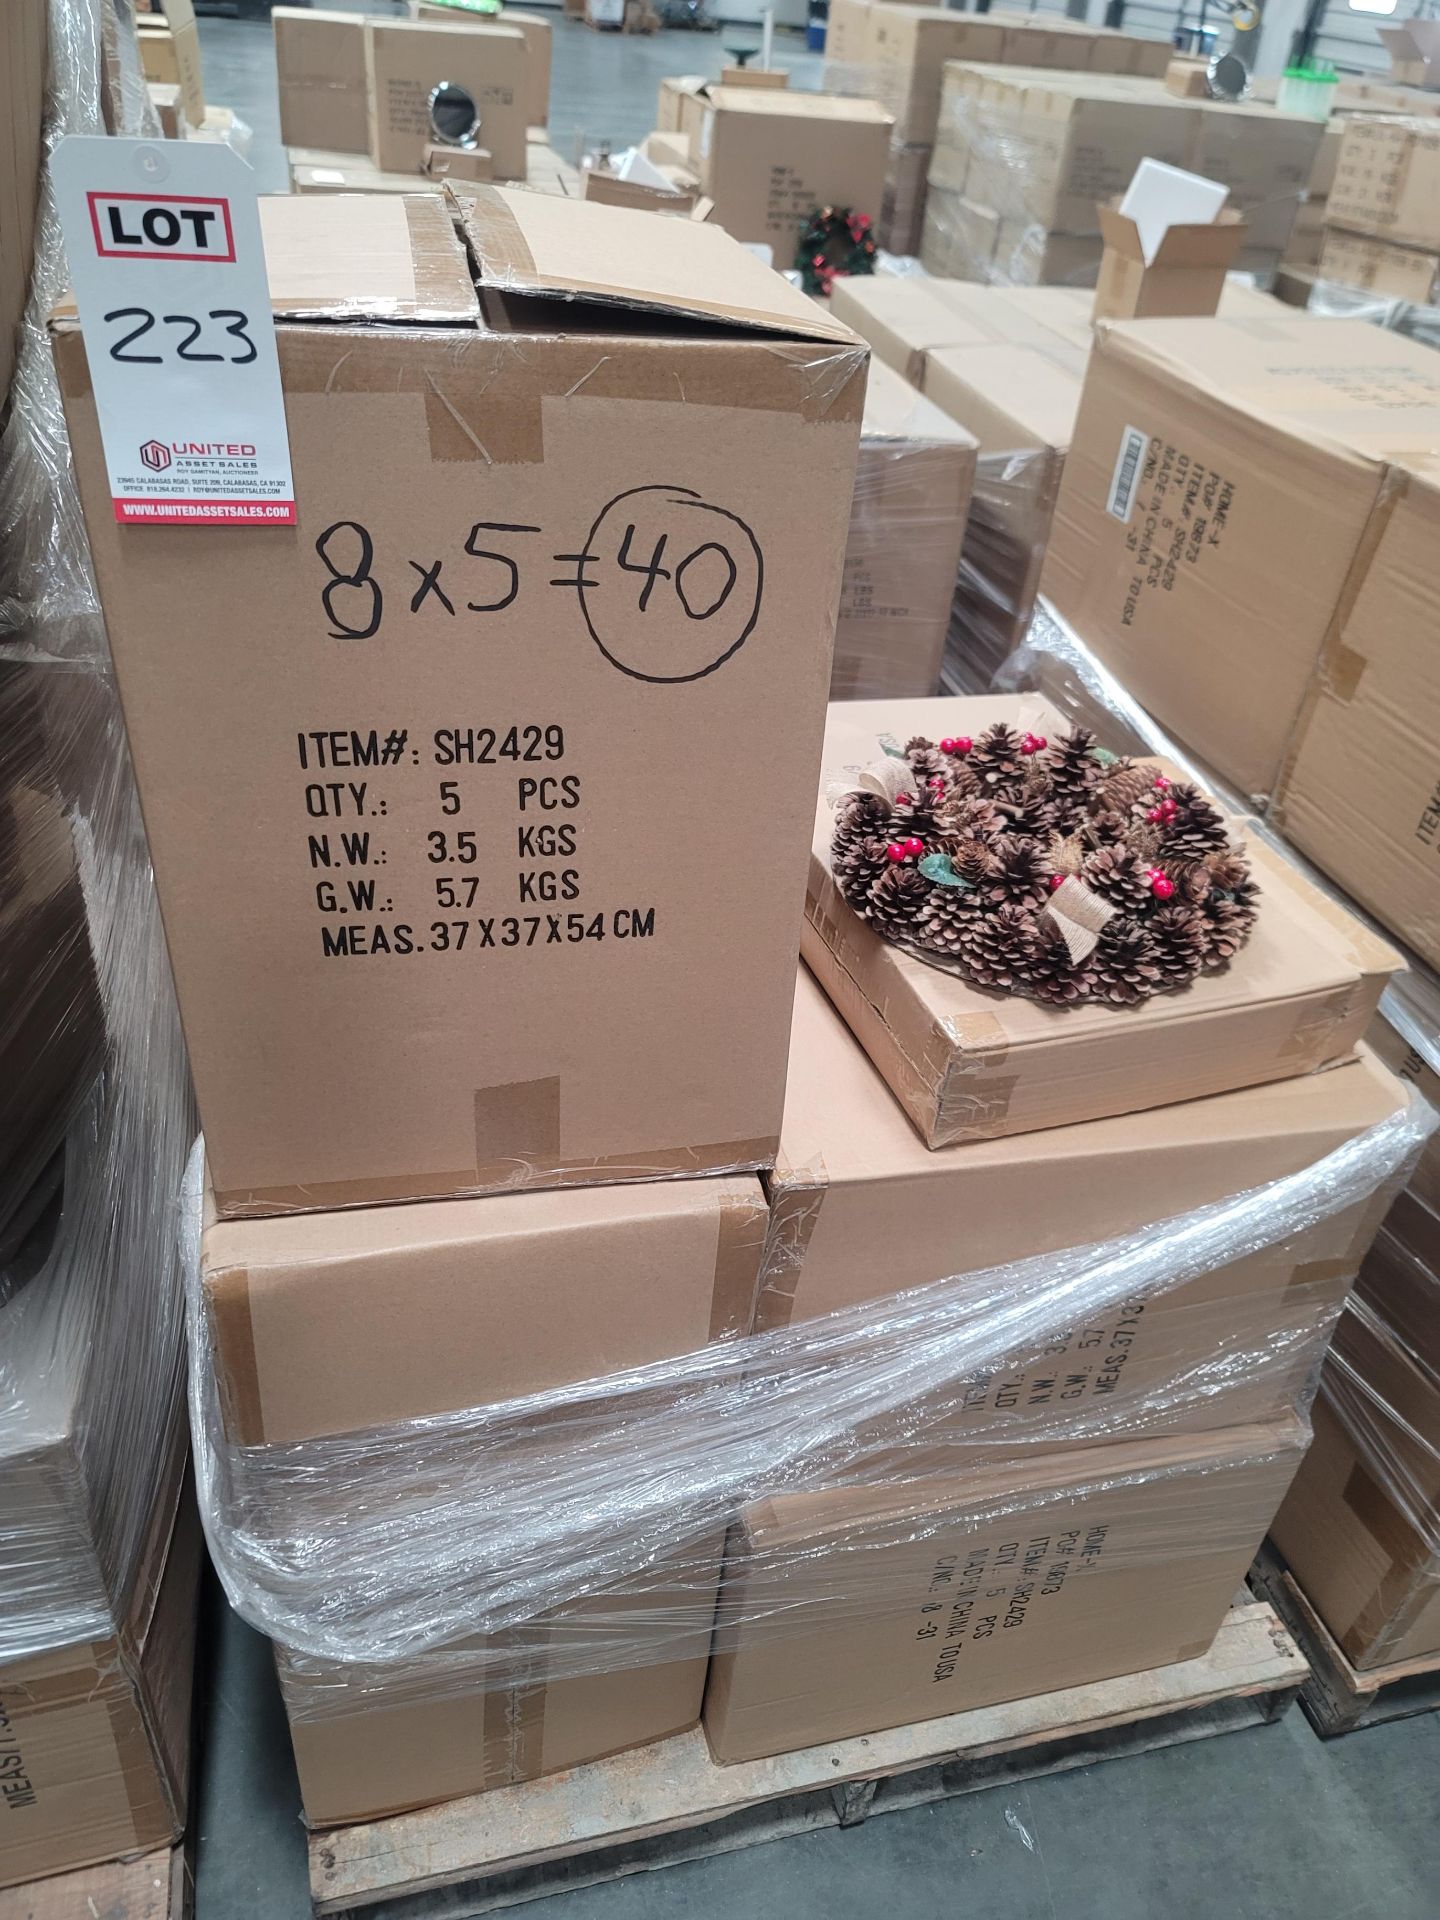 LOT - PALLET OF (40) 13" PINECONE WREATH, (8 CASES/5 PER CASE) - Image 3 of 3